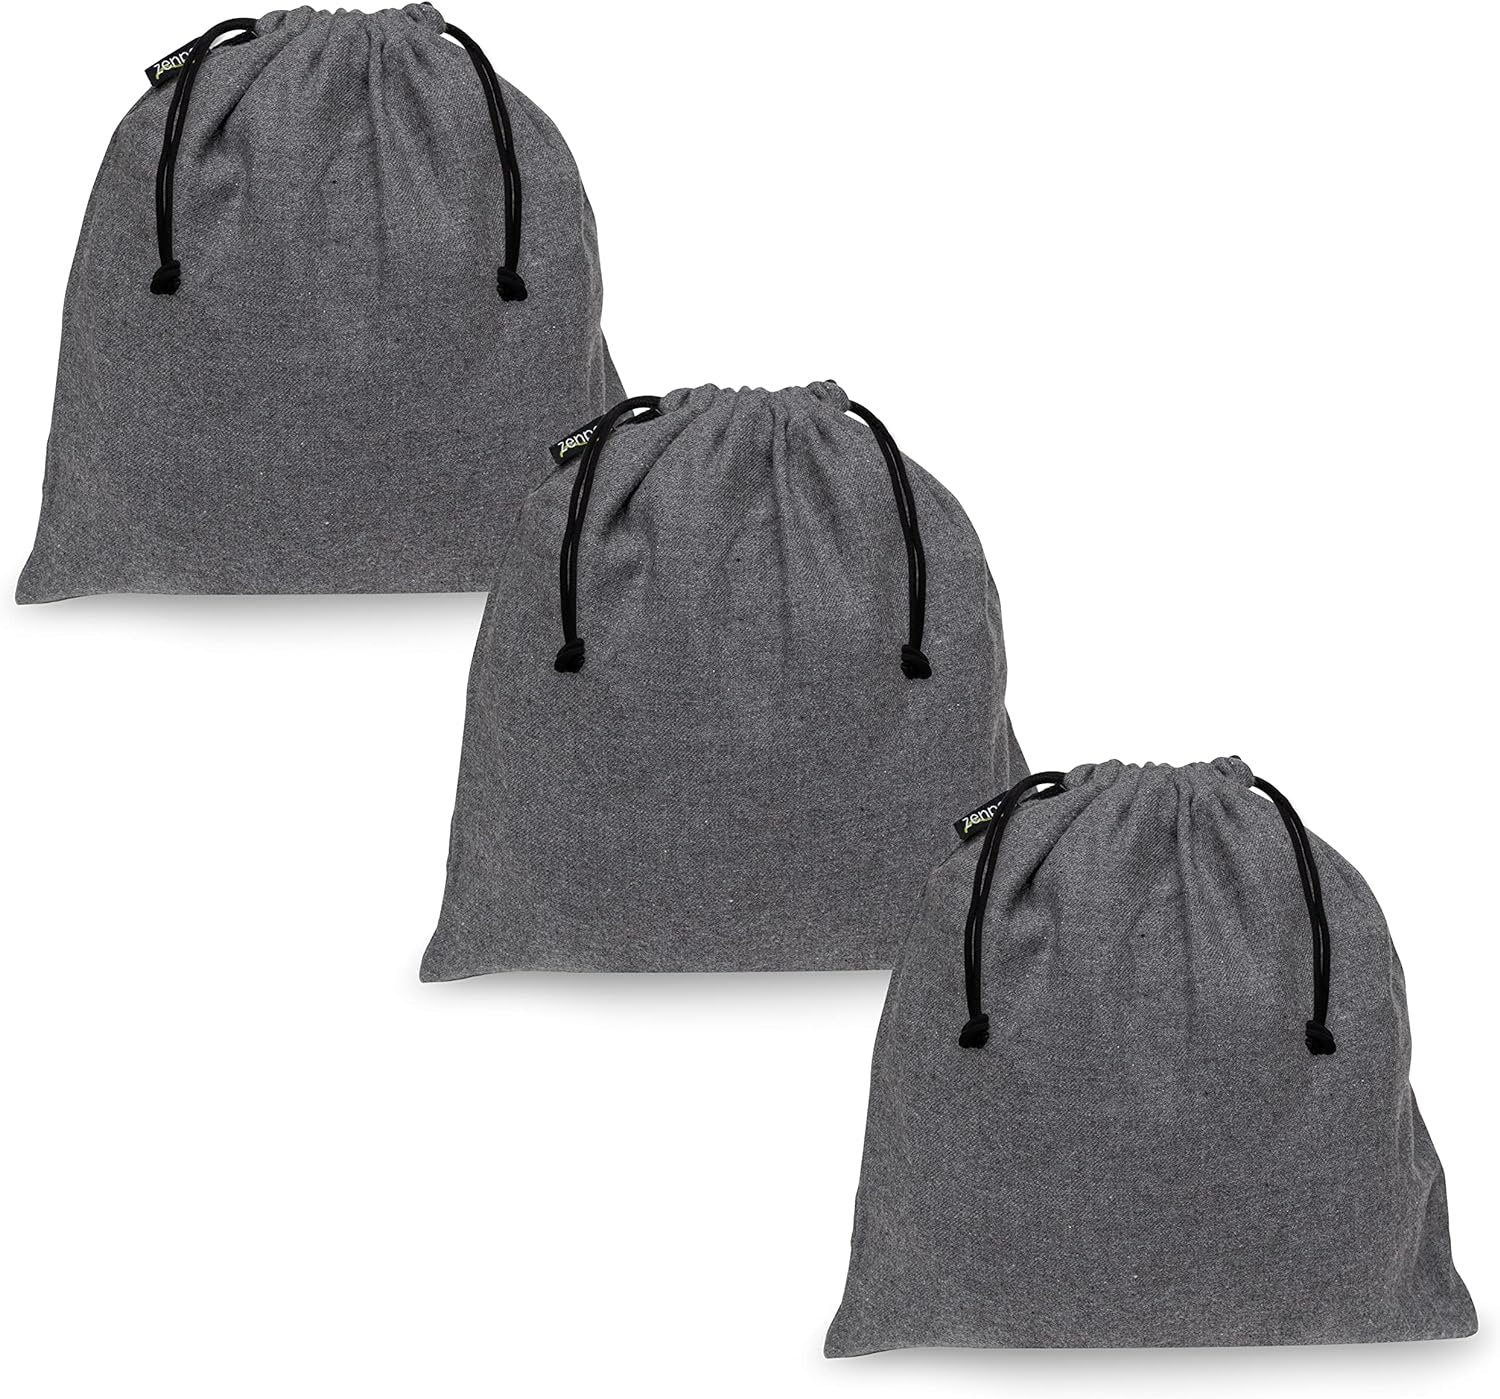 Drawstring Pouch - 3 Set Gray Cotton Dust Bags, Luggage Organizer, Travel Essentials for Suitcase Packing & Organizing, Home Storage, Small Clutches, Wallets, Belts, Leather Goods - 11x11.5